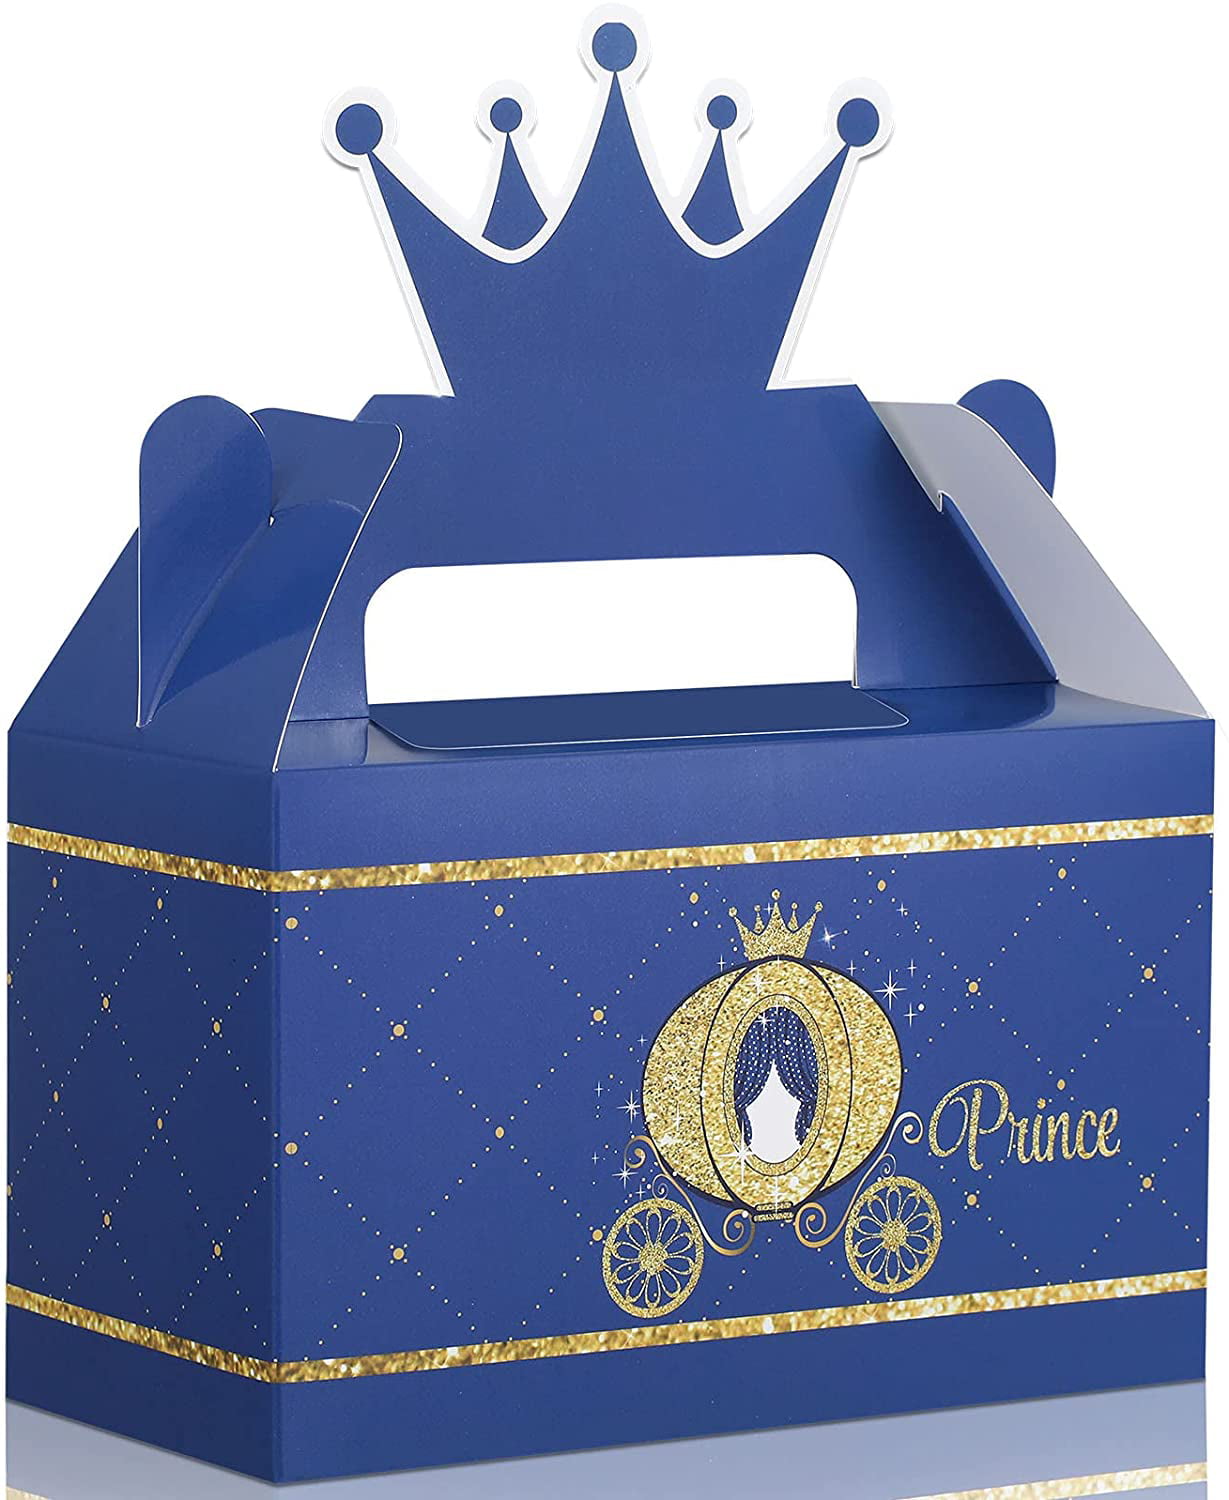 Gender reveal Party decoration Party favor box Personalized crown pillow box for baby shower Prince and Princess birthday decoration